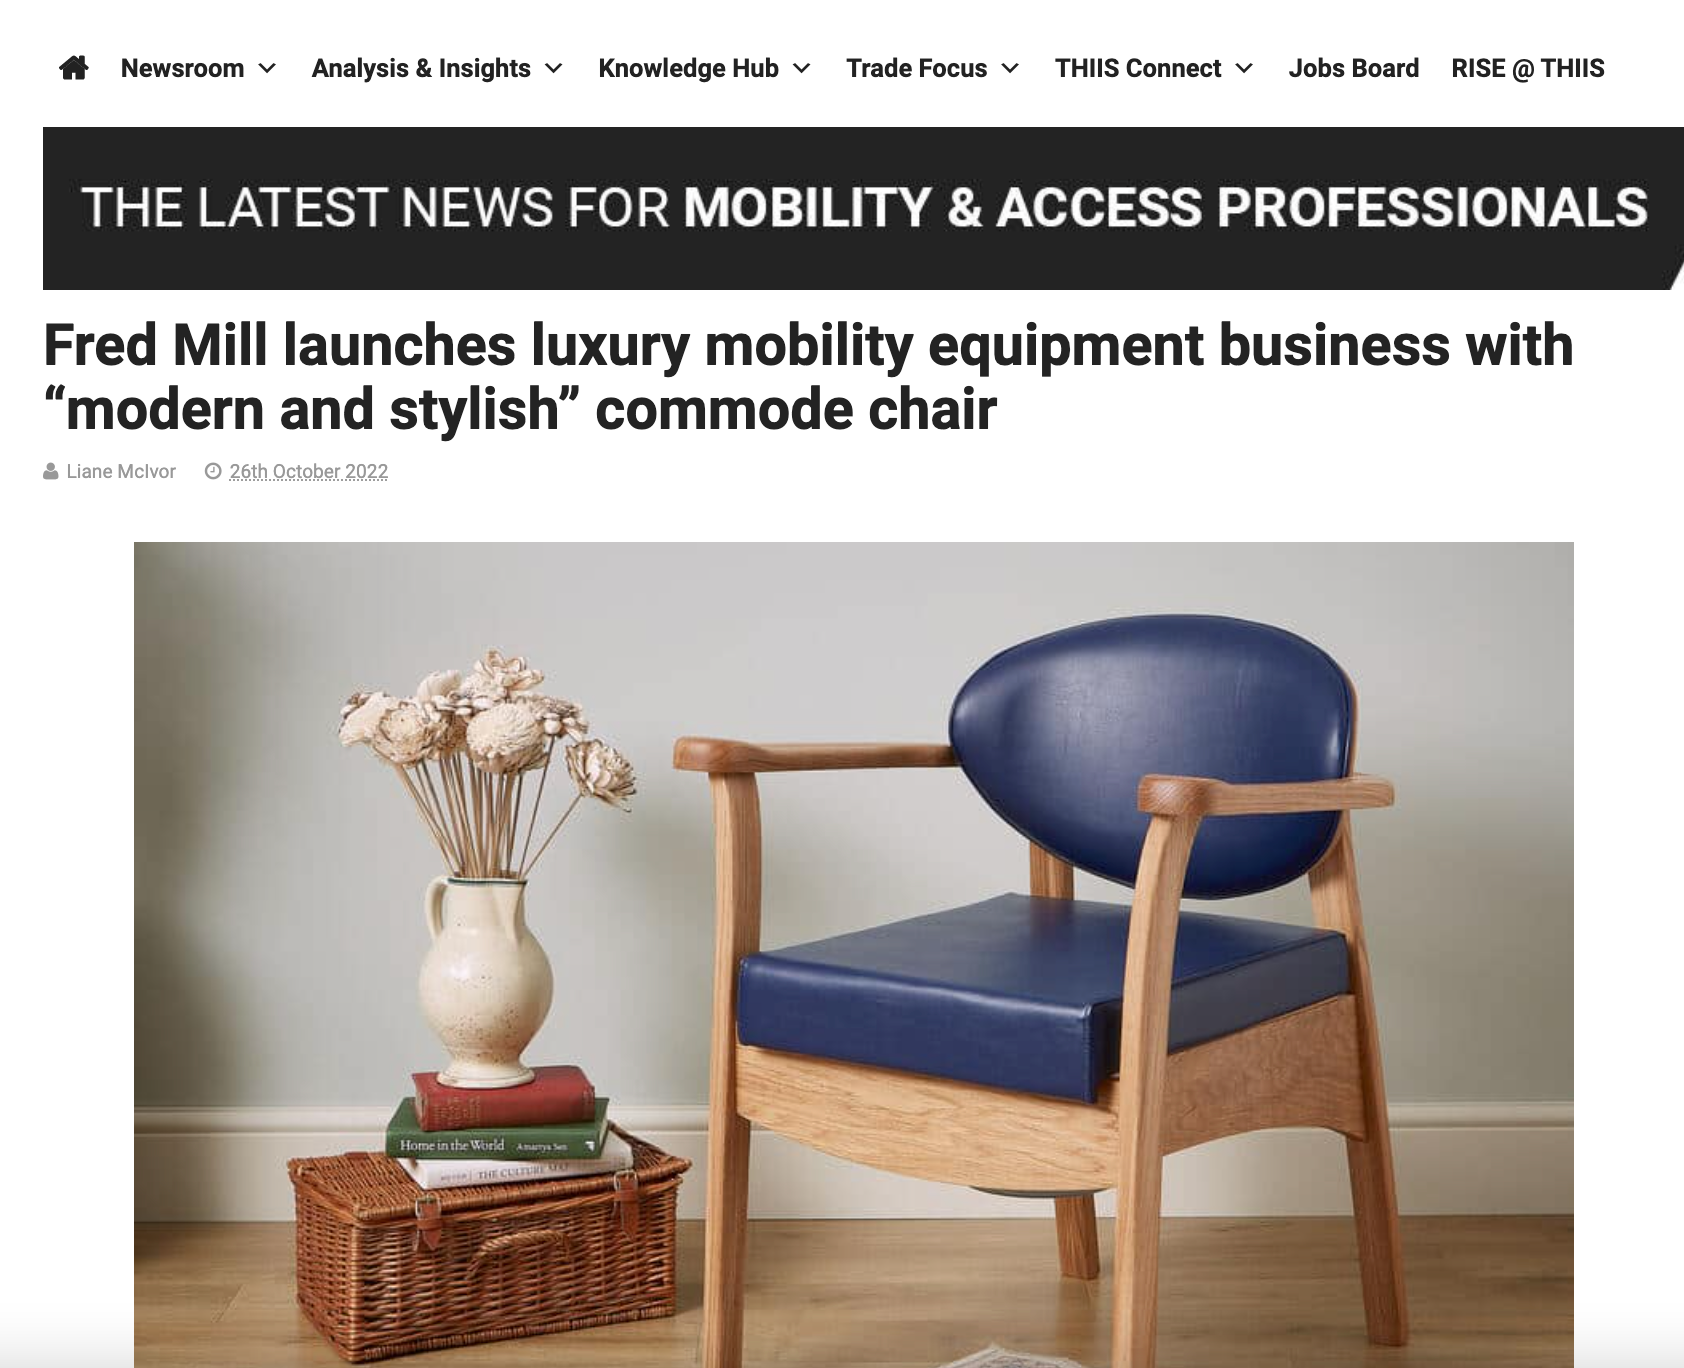 THIIS Magazine's feature on the launch of Fred Mill's luxury wooden commode chair